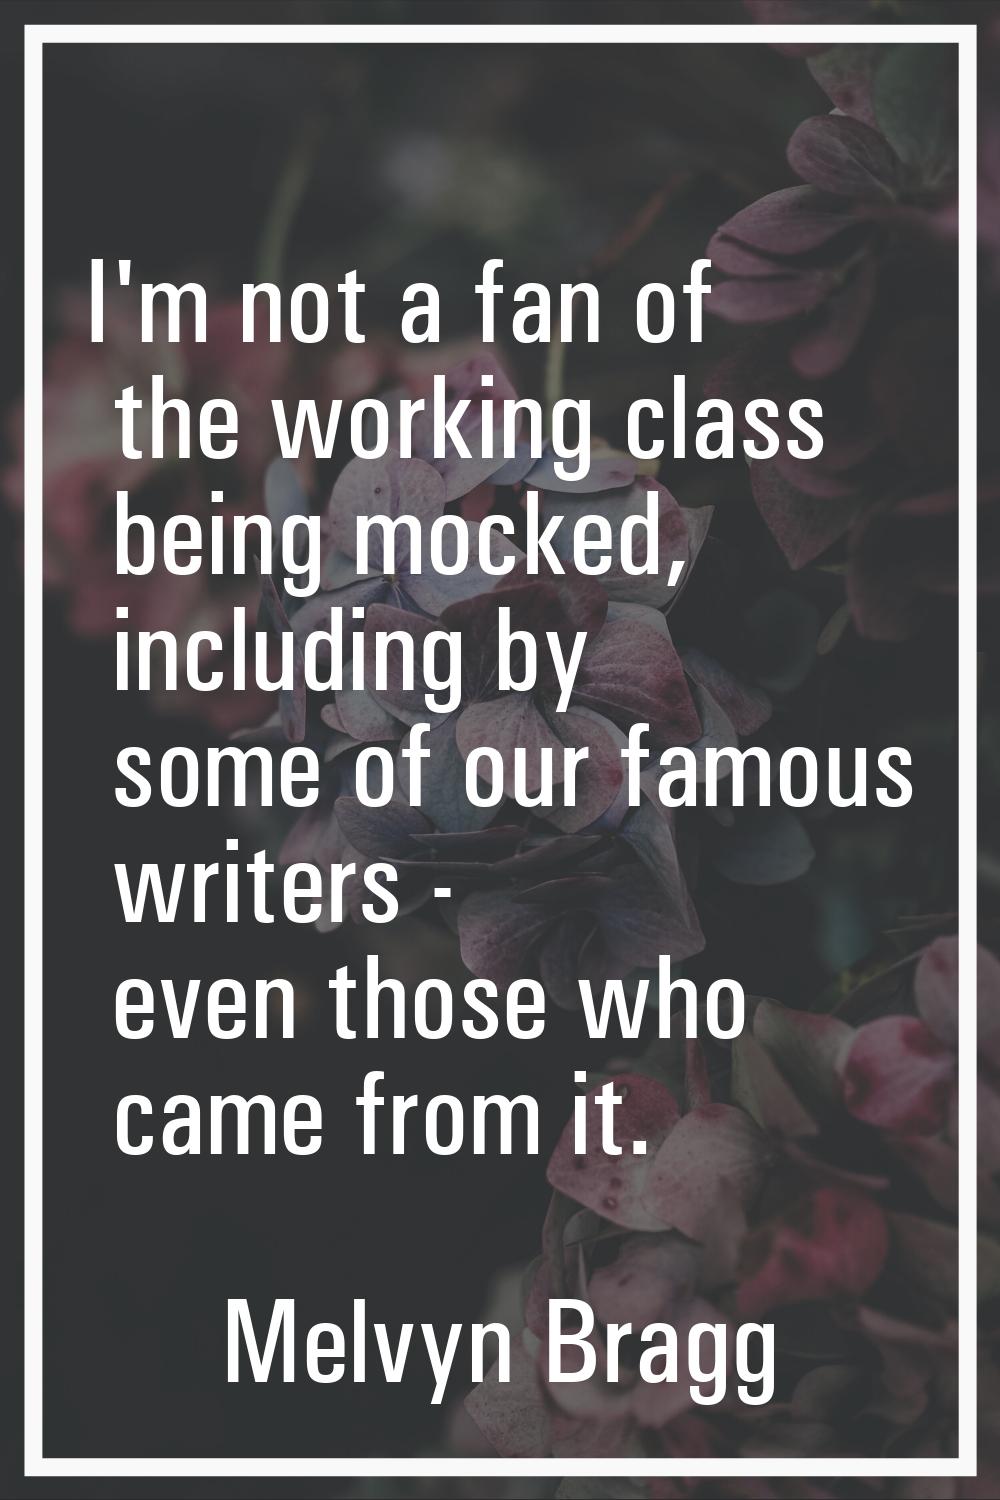 I'm not a fan of the working class being mocked, including by some of our famous writers - even tho